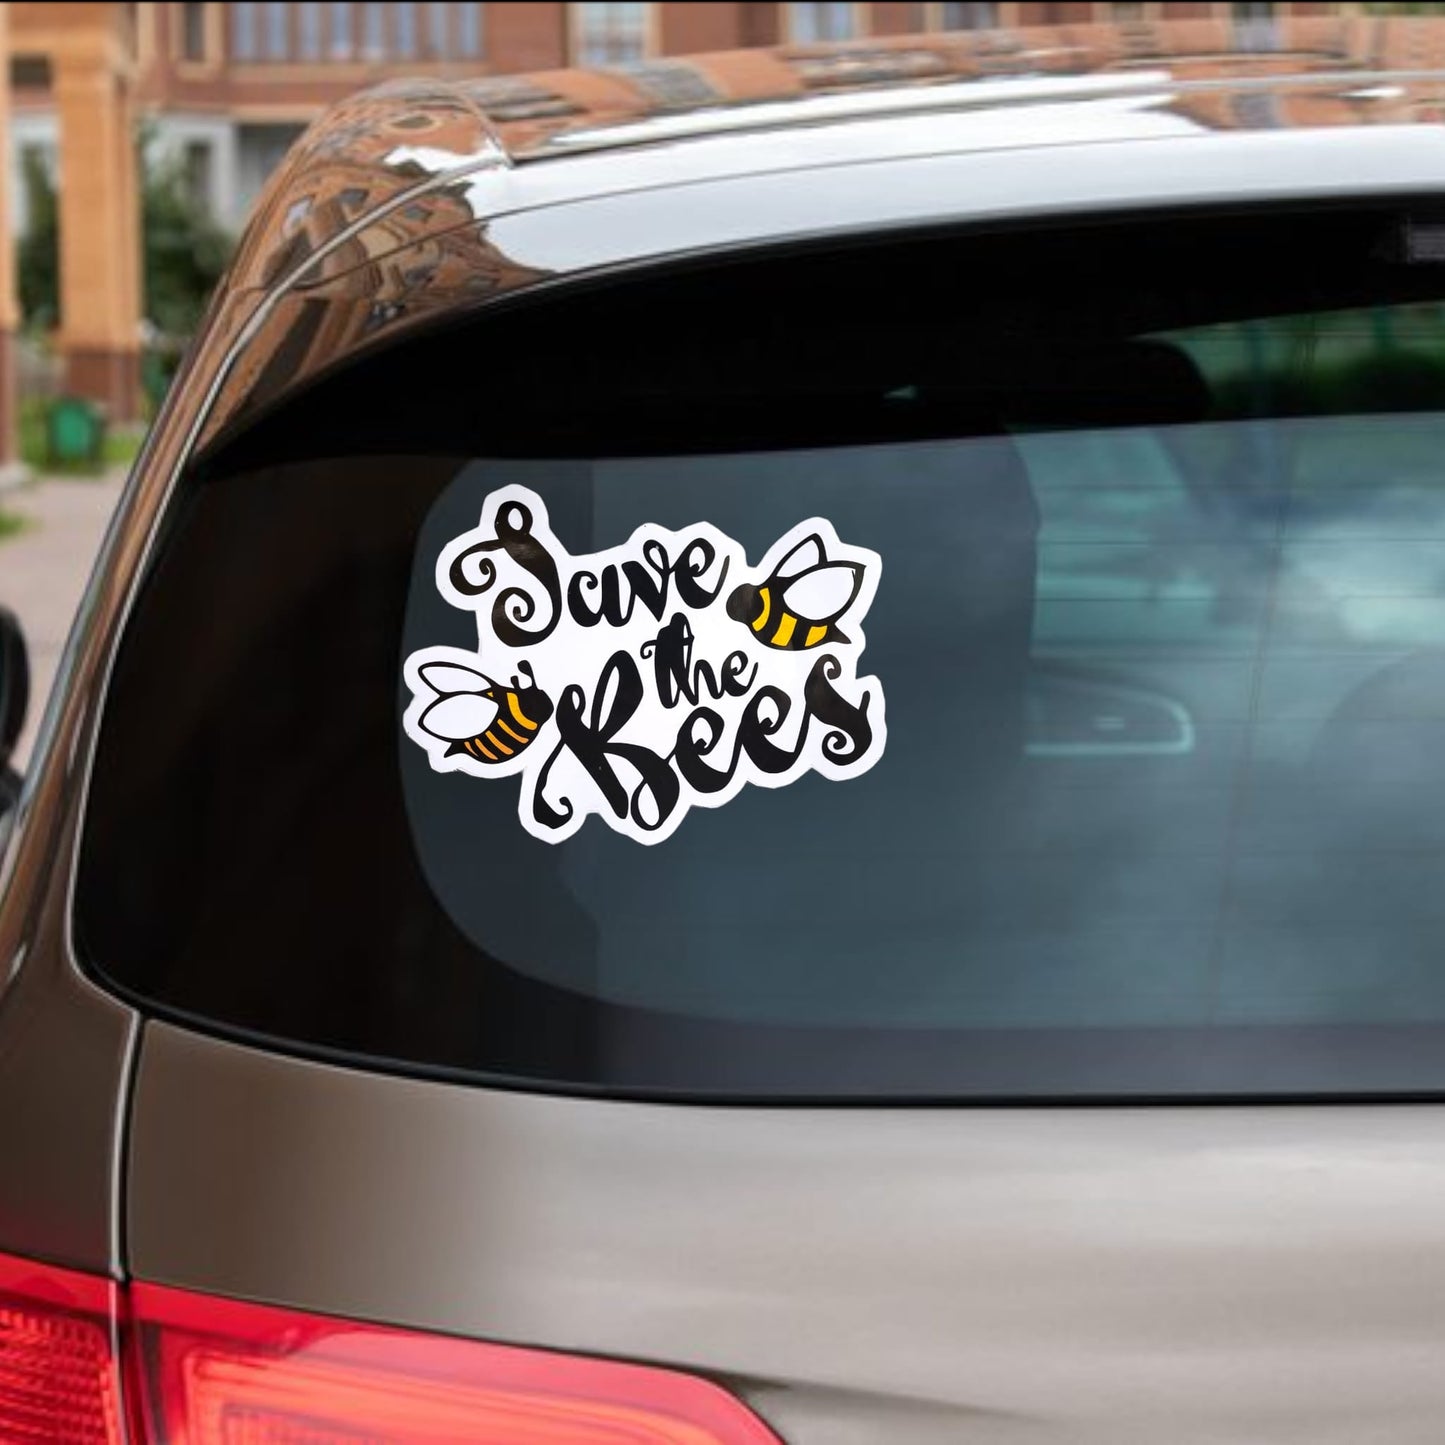 Save The Bees Car Sticker - Donagh Bees